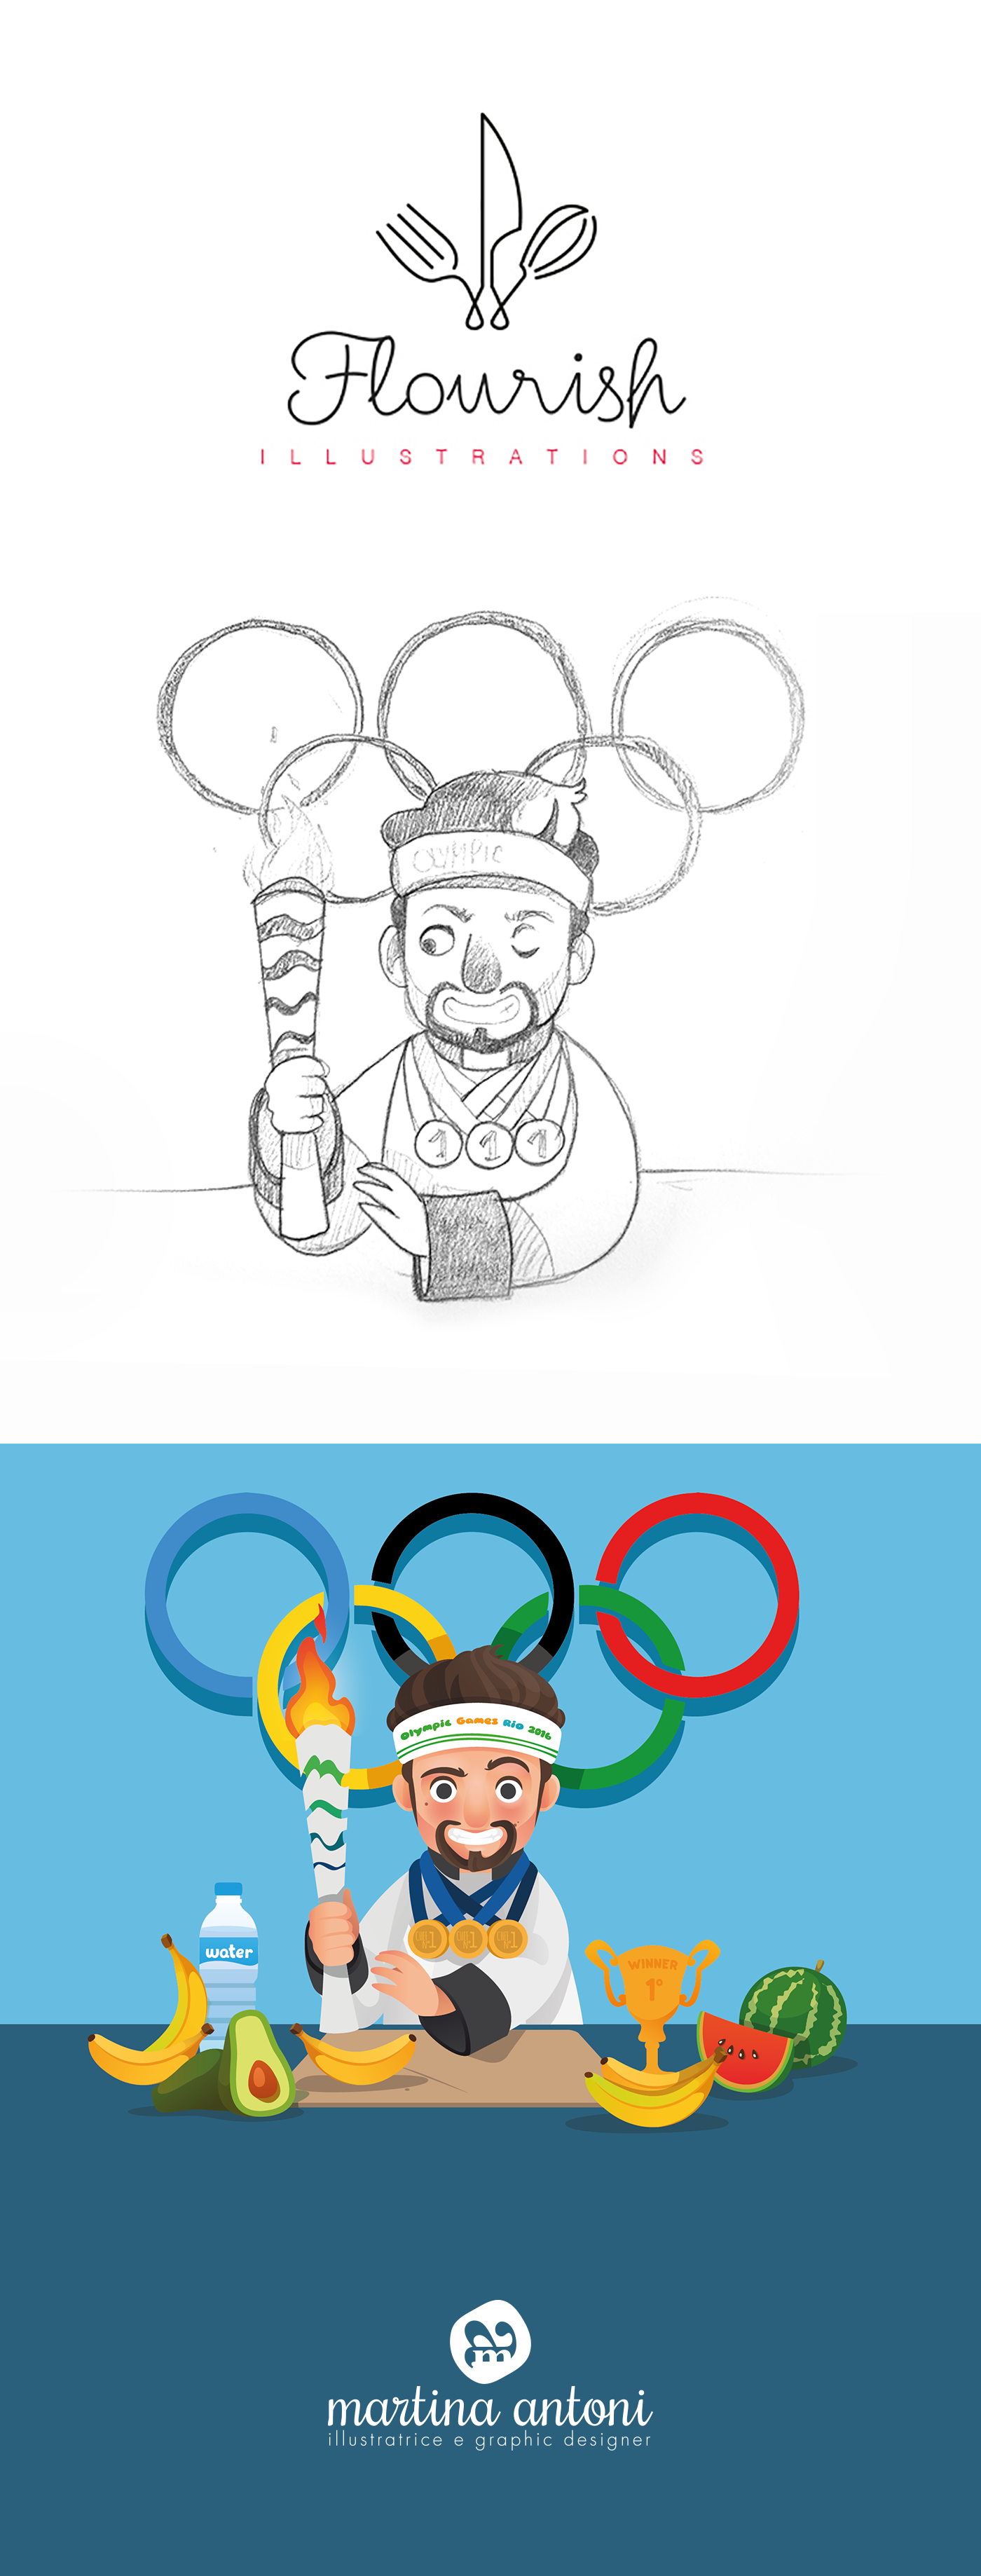 Olympic Games olympic sports rio rio 2016 Brazil chef Bananas cooking kitchen